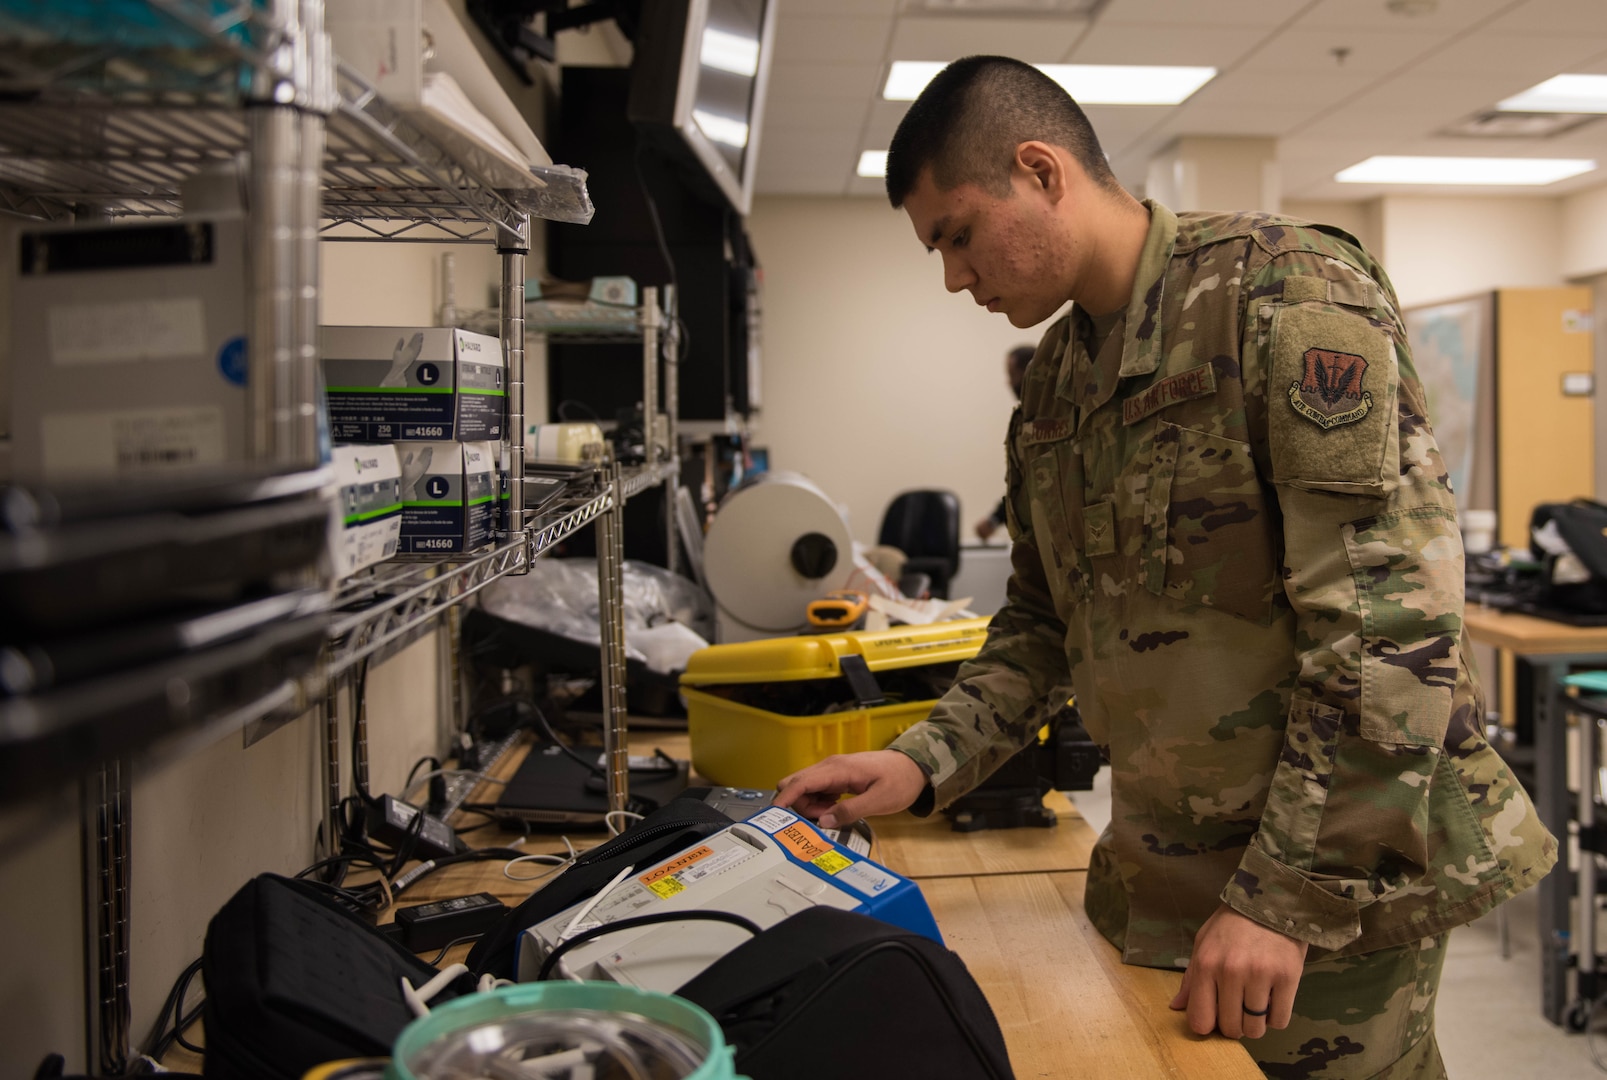 U.S. Air Force Airman 1st Class Timothy Torres, 633rd Medical Group biomedical equipment technician, prepares to repair a defibrillator at Joint Base Langley-Eustis, Virginia, Nov. 8, 2019. BMETs provide timely equipment repair to the hospital helping to ensure patient care. (U.S. Air Force photo by Airman 1st Class Sarah Dowe)